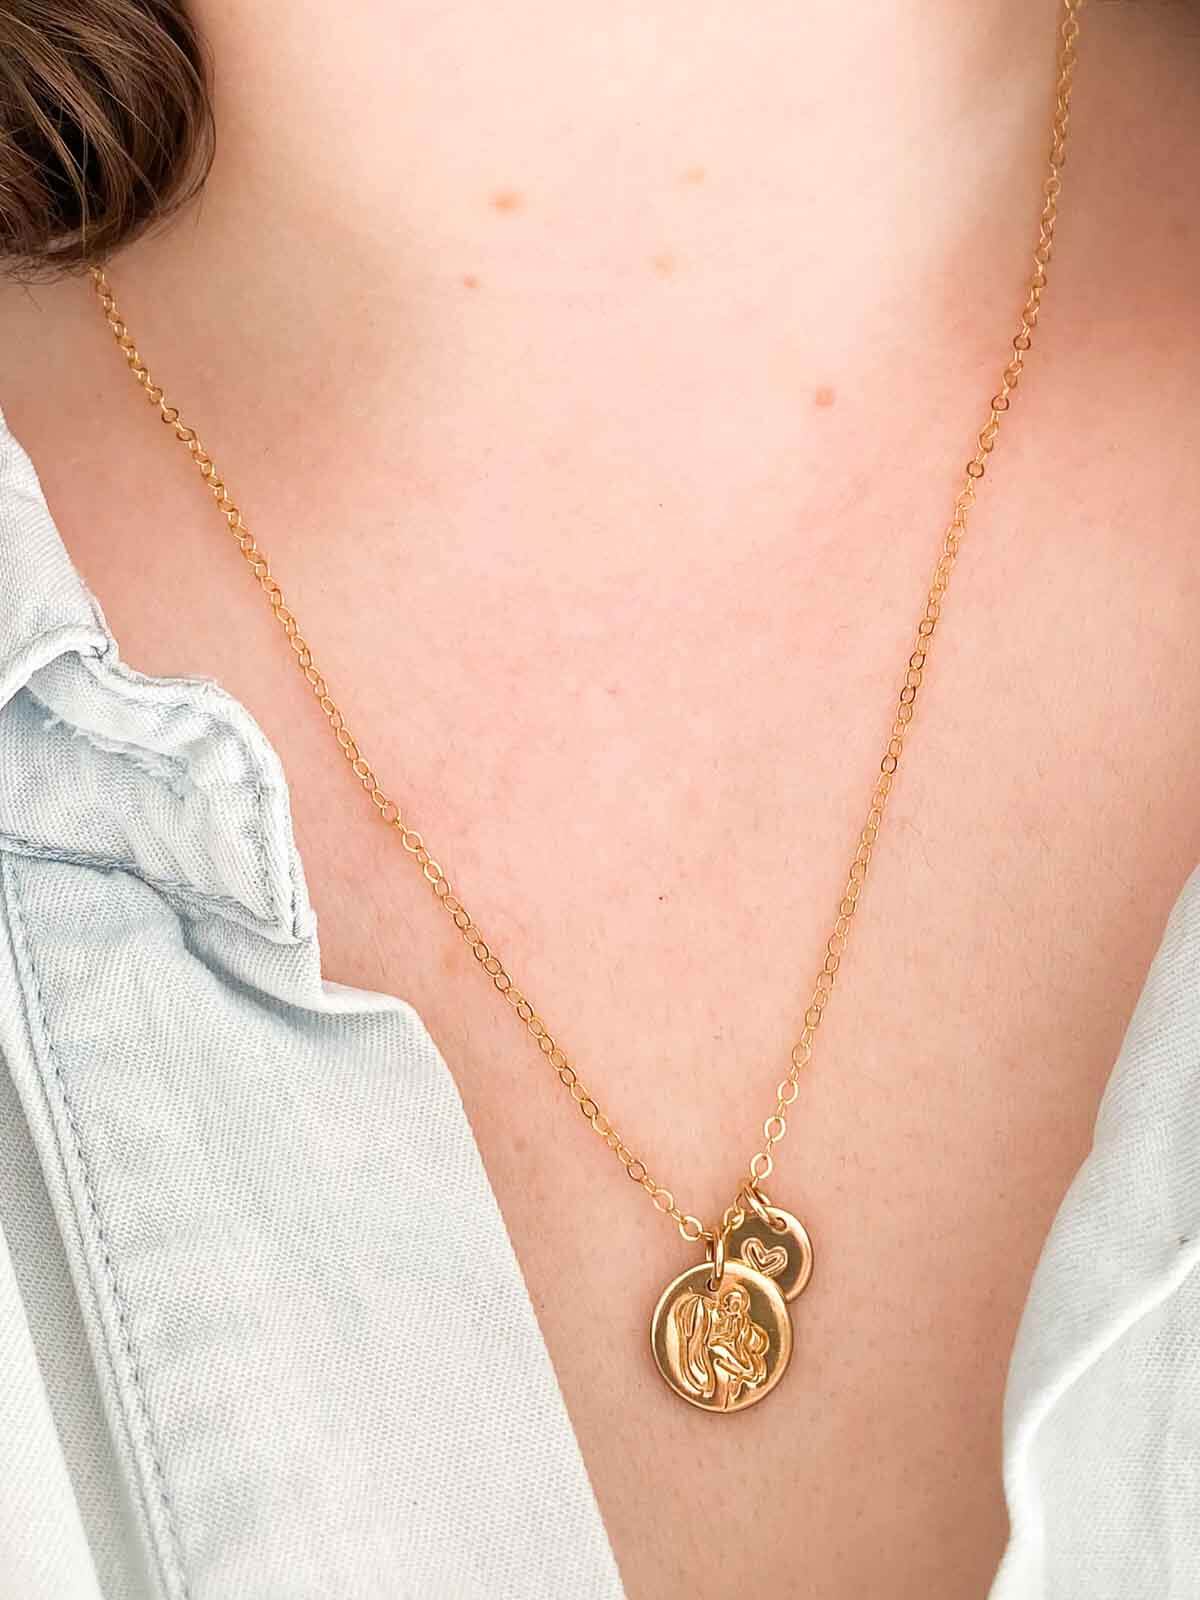 Mum Necklace in 18k Yellow Gold | El Mawardy Jewelry